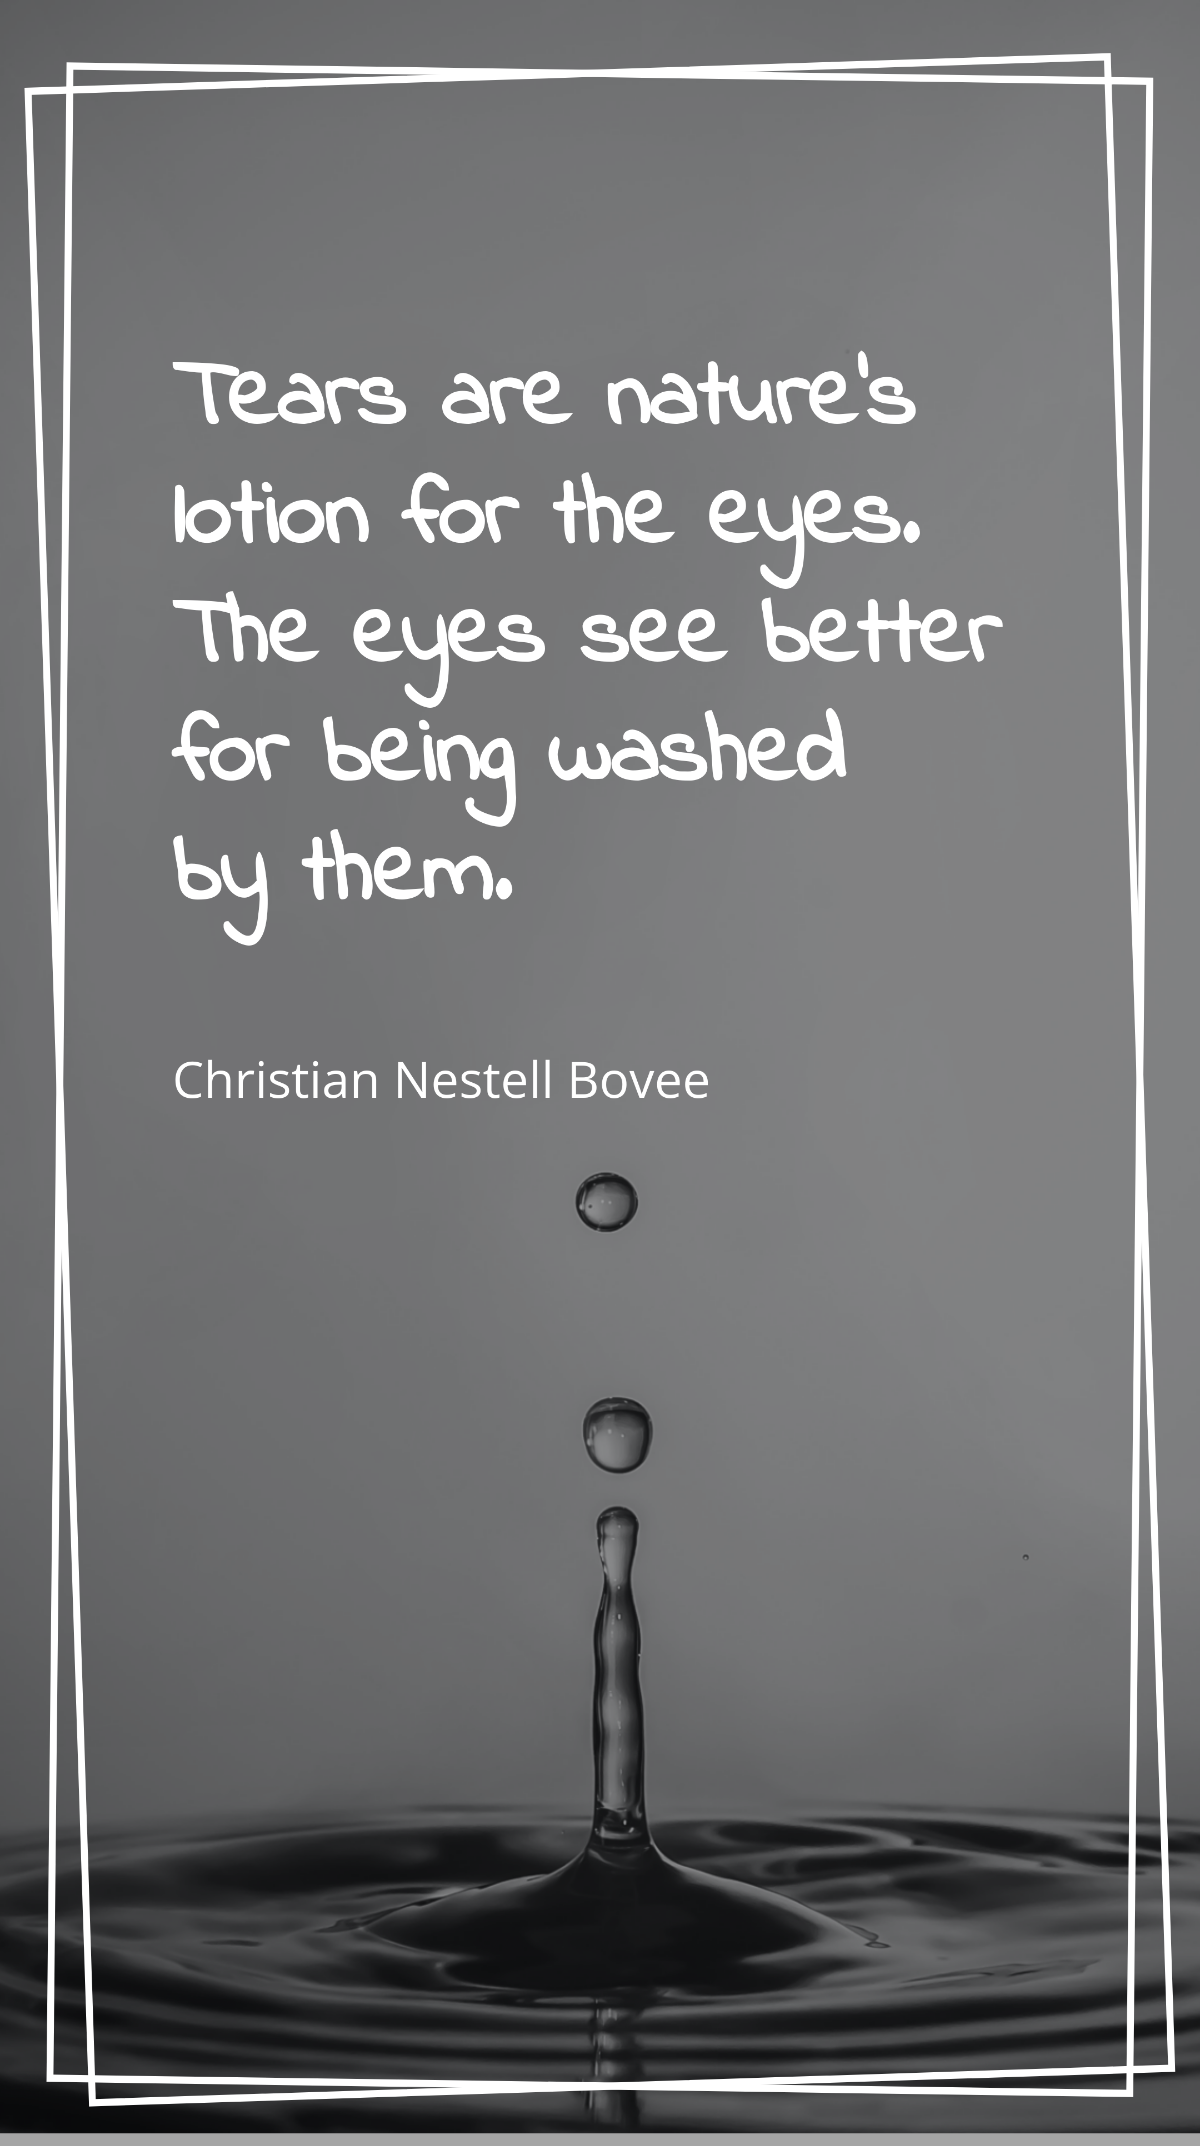 Christian Nestell Bovee - Tears are nature's lotion for the eyes. The eyes see better for being washed by them. Template